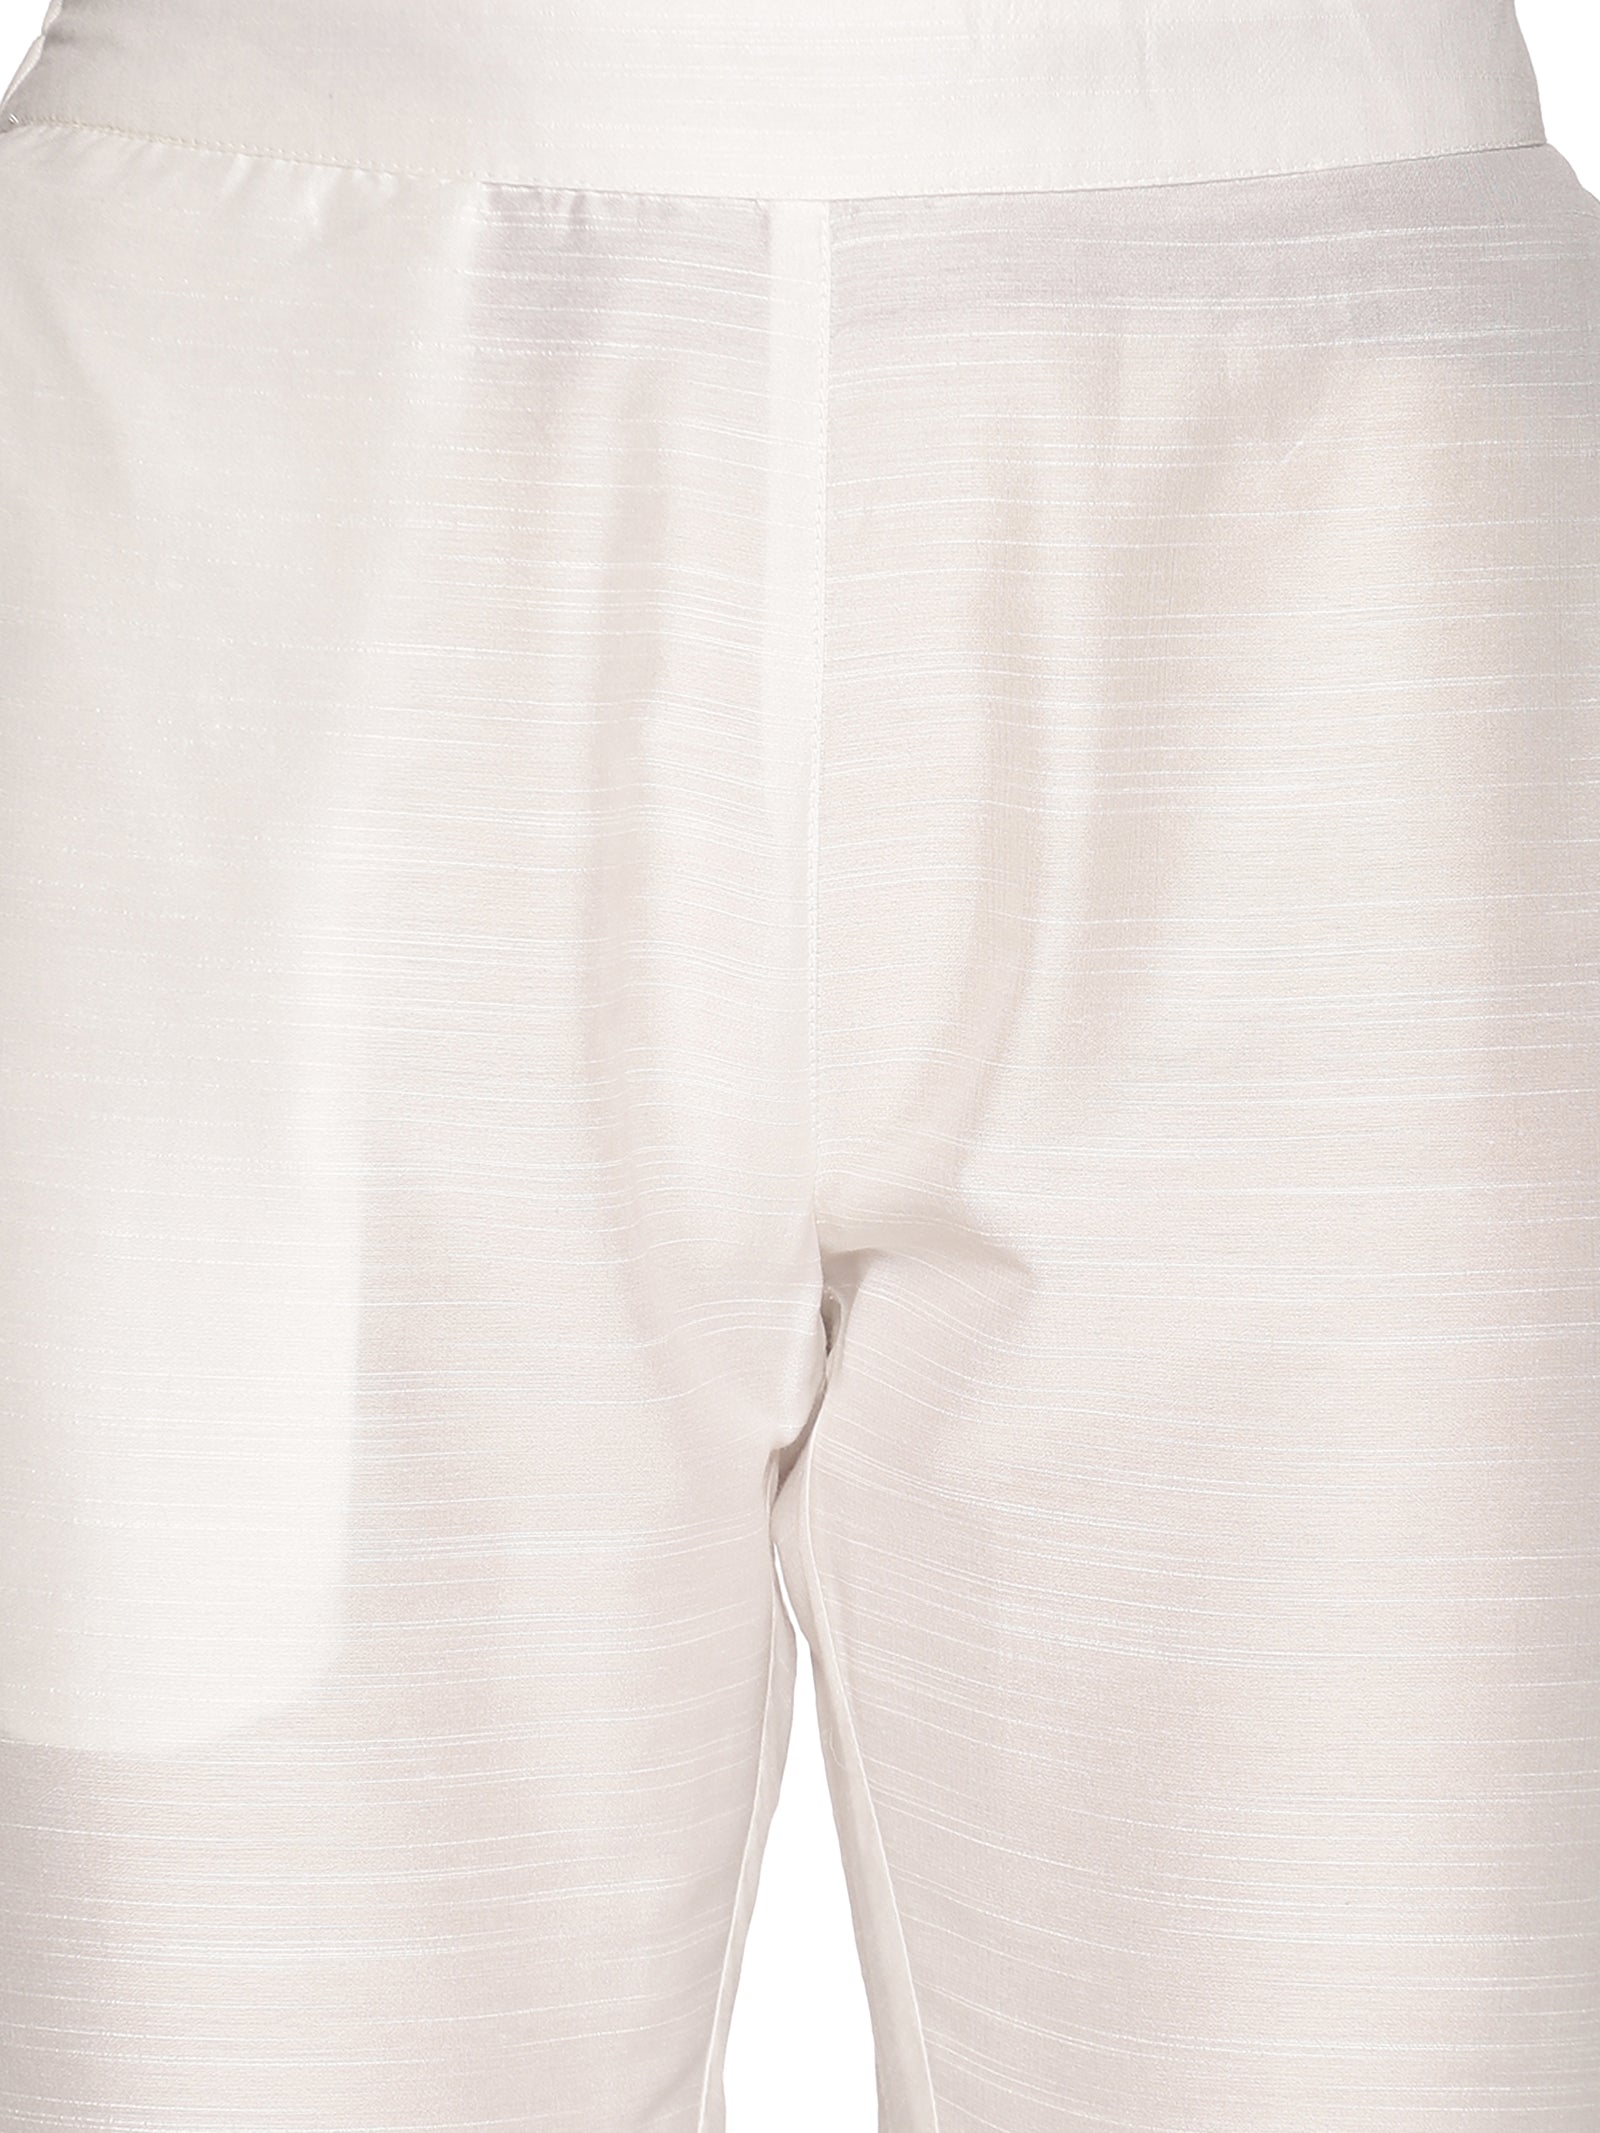 Pack of 2 White & Off White Art Silk Trousers